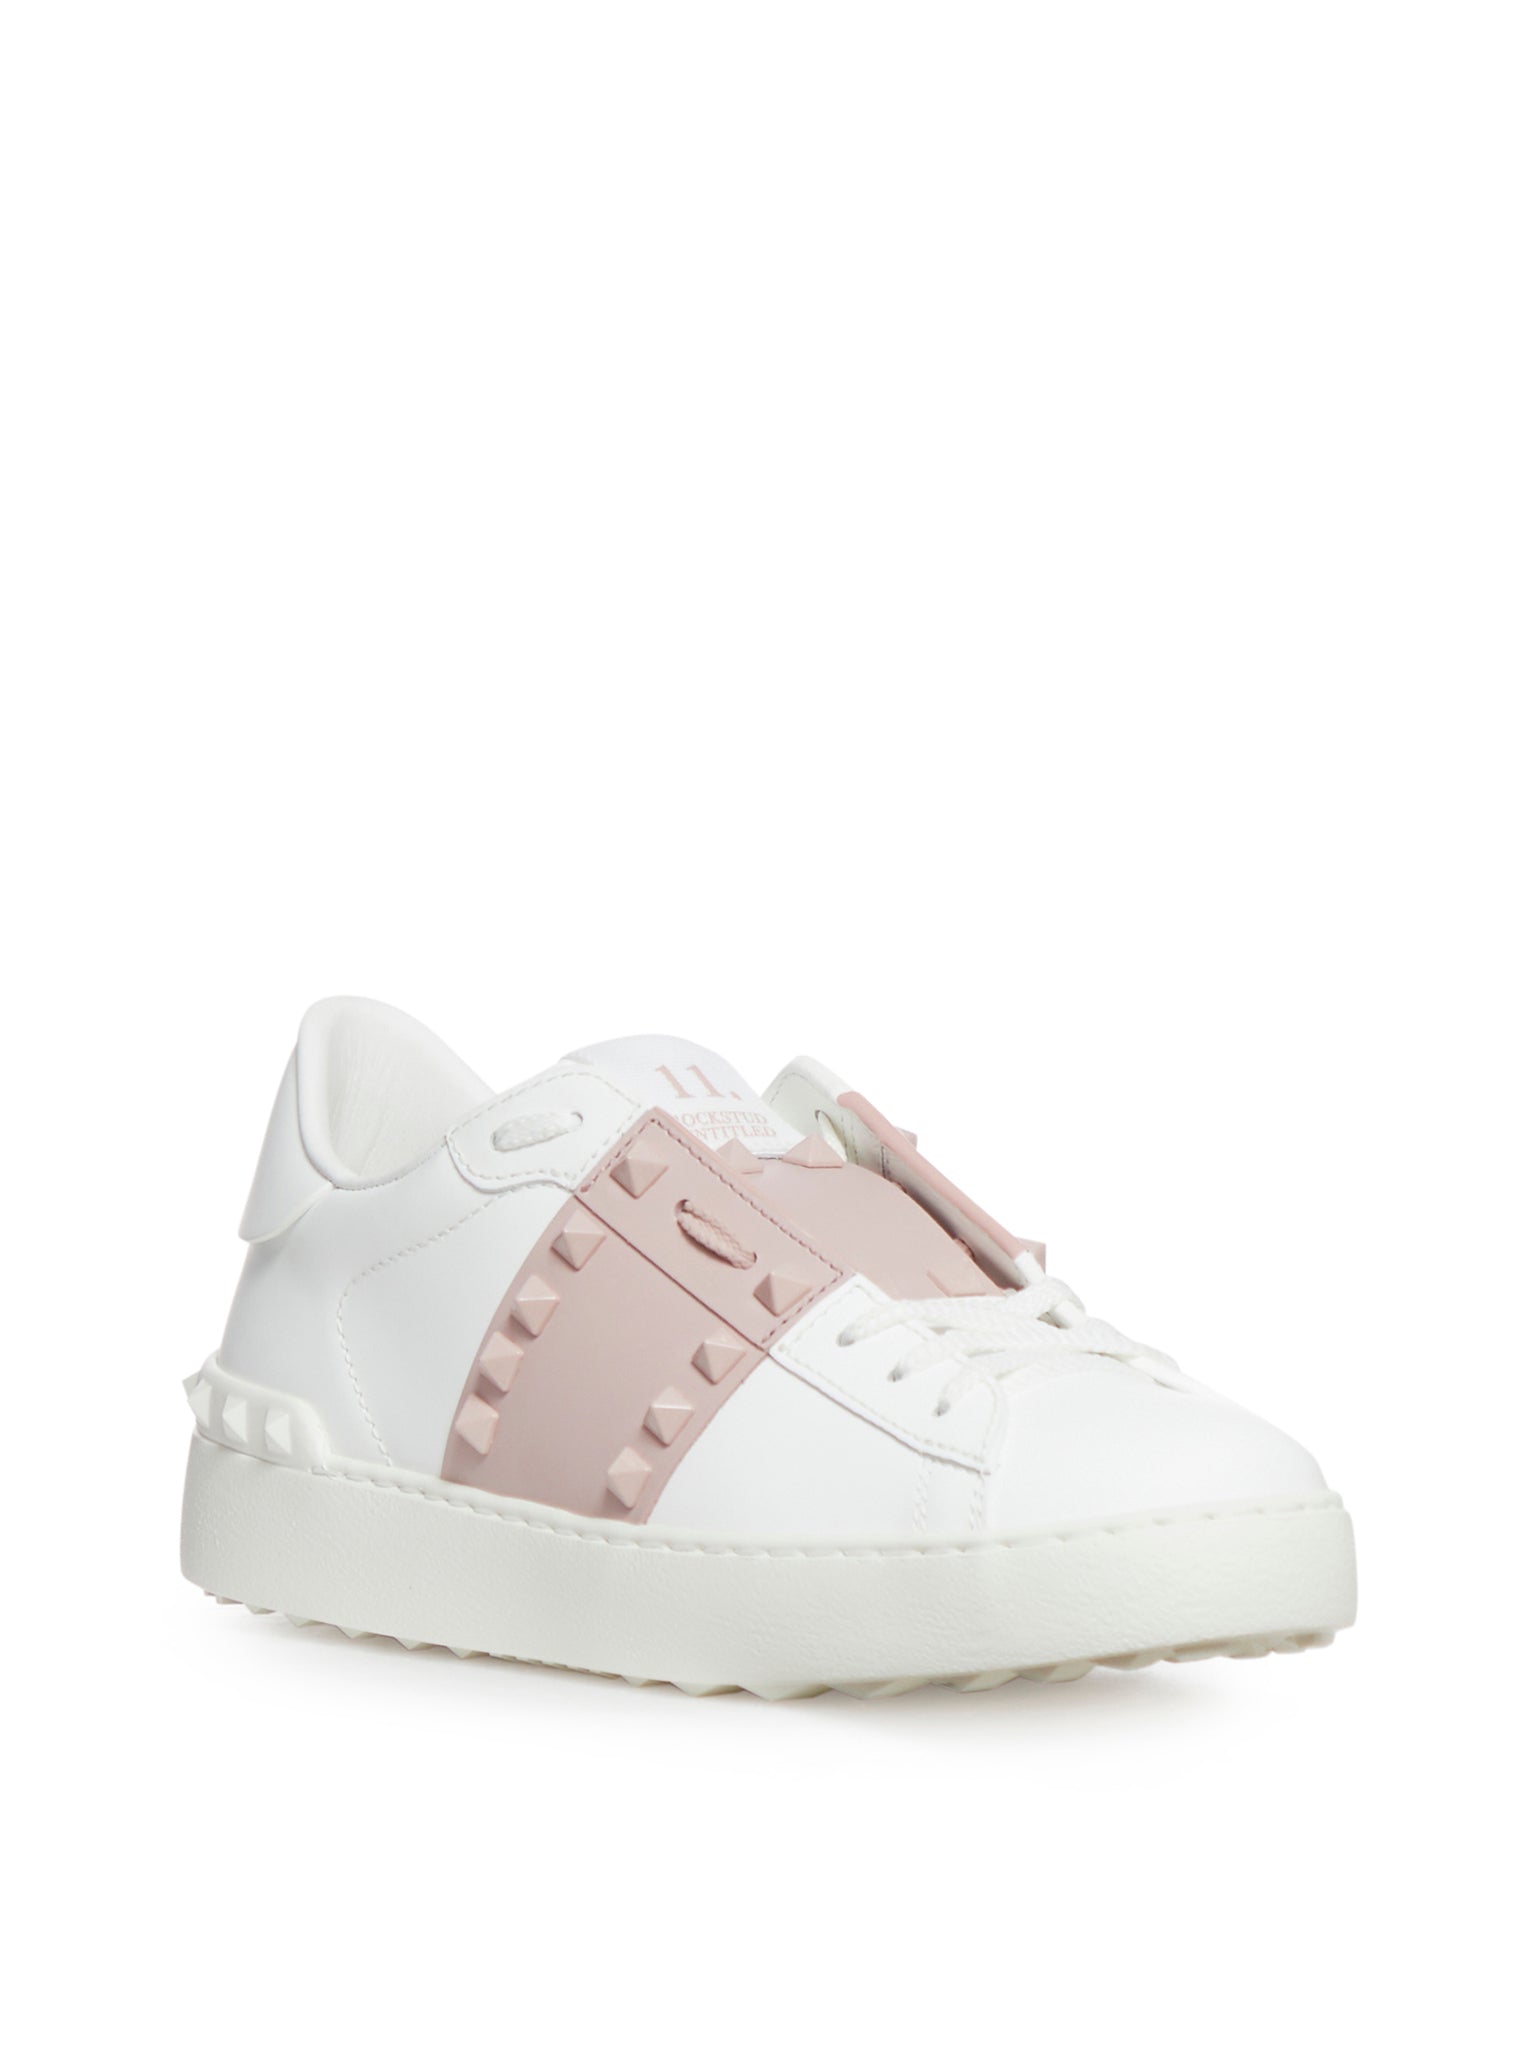 ROCKSTUD UNTITLED CALFSKIN SNEAKERS WITH MATCHING STUDS